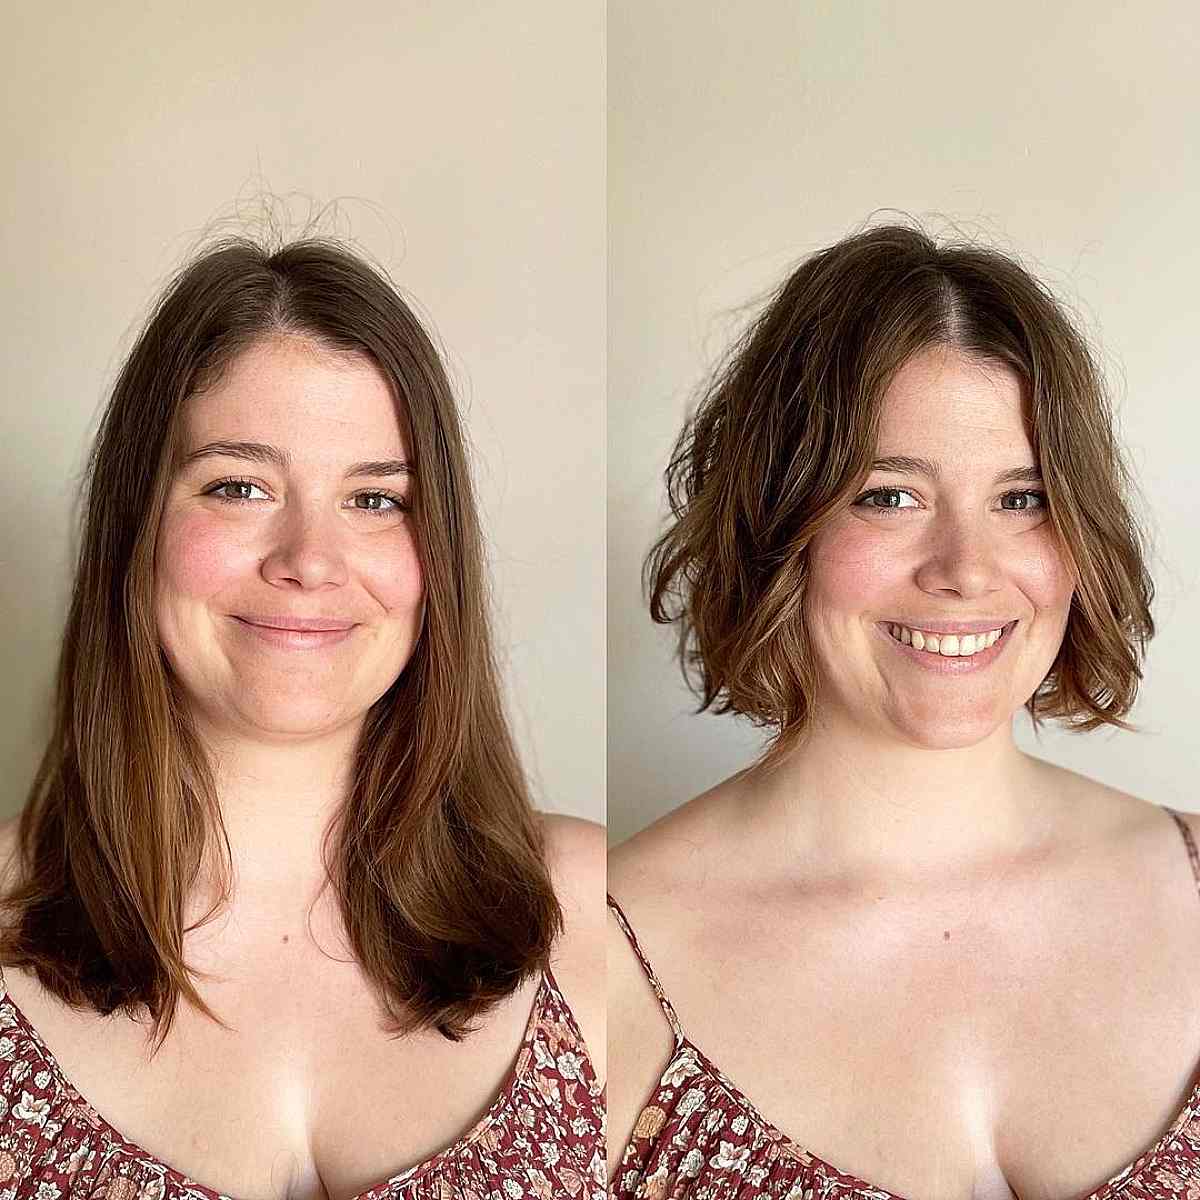 19 Flattering Short Haircut Ideas for Full Faces to Look Thinner